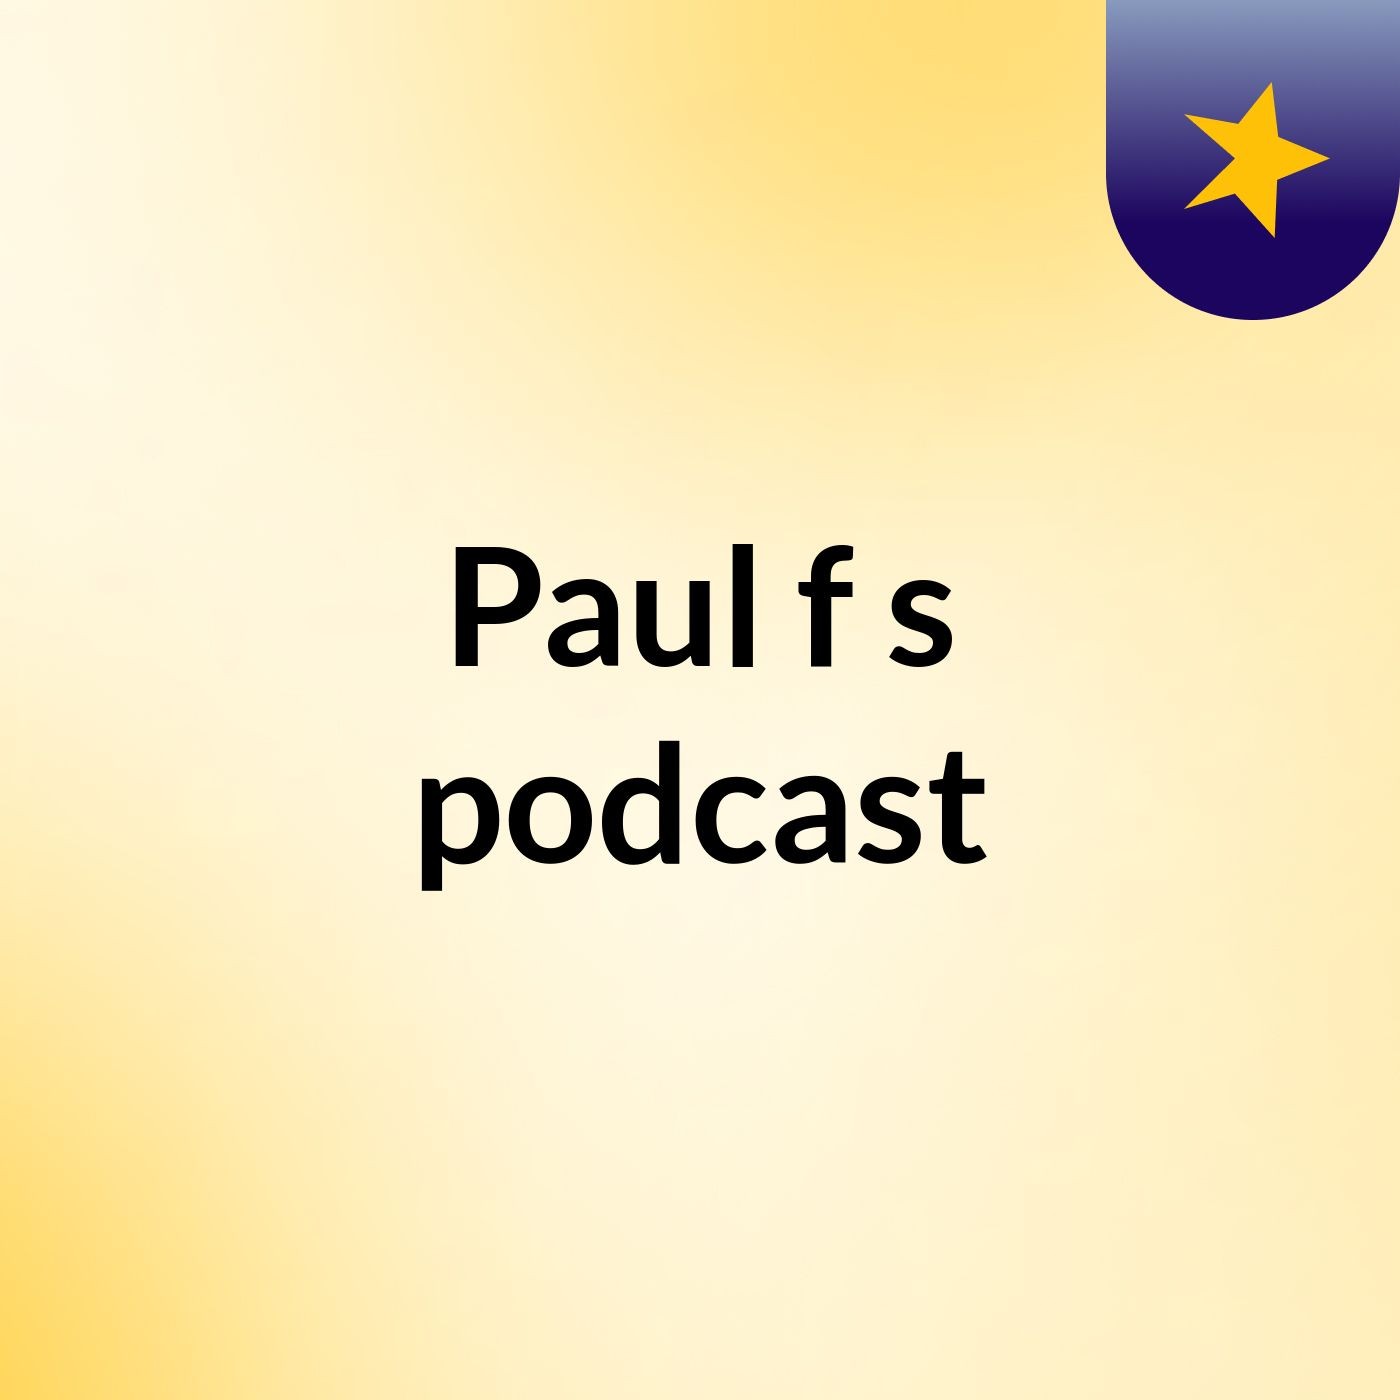 Podcast #1 with Paul